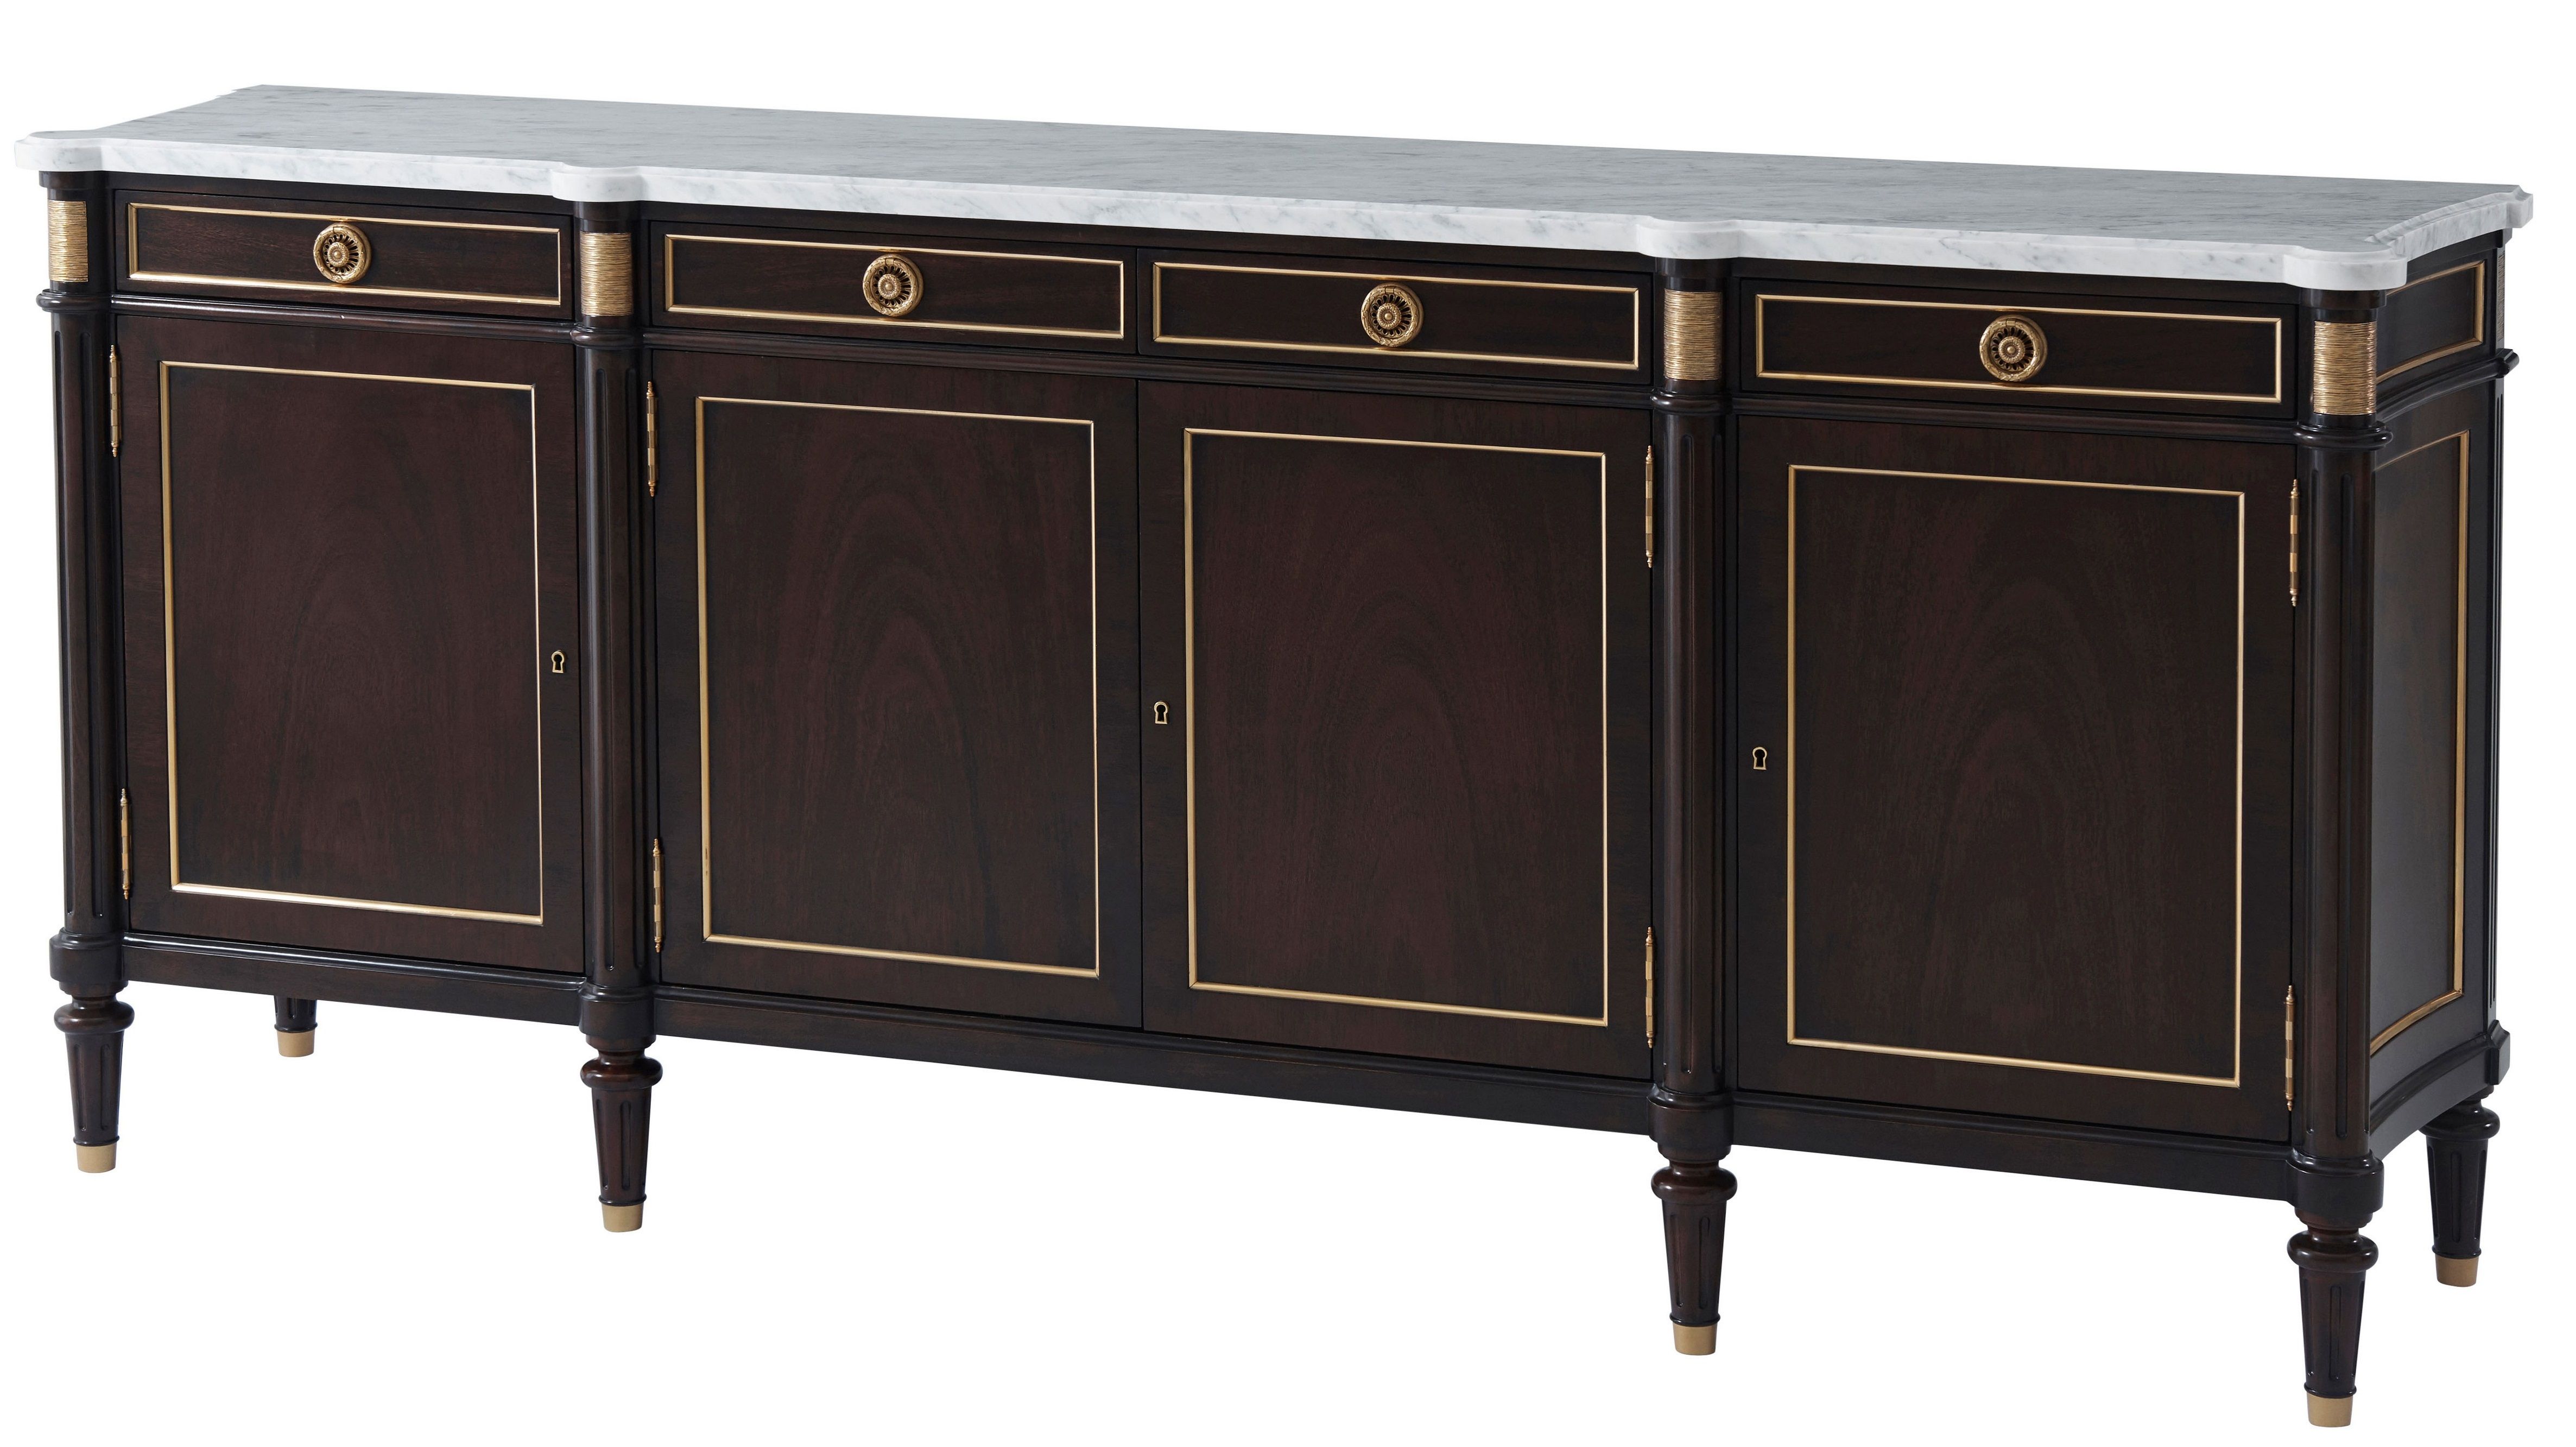 This buffet sideboard has a Bianco Carrara marble top, fluted column uprights with cotton-reel cast capitals